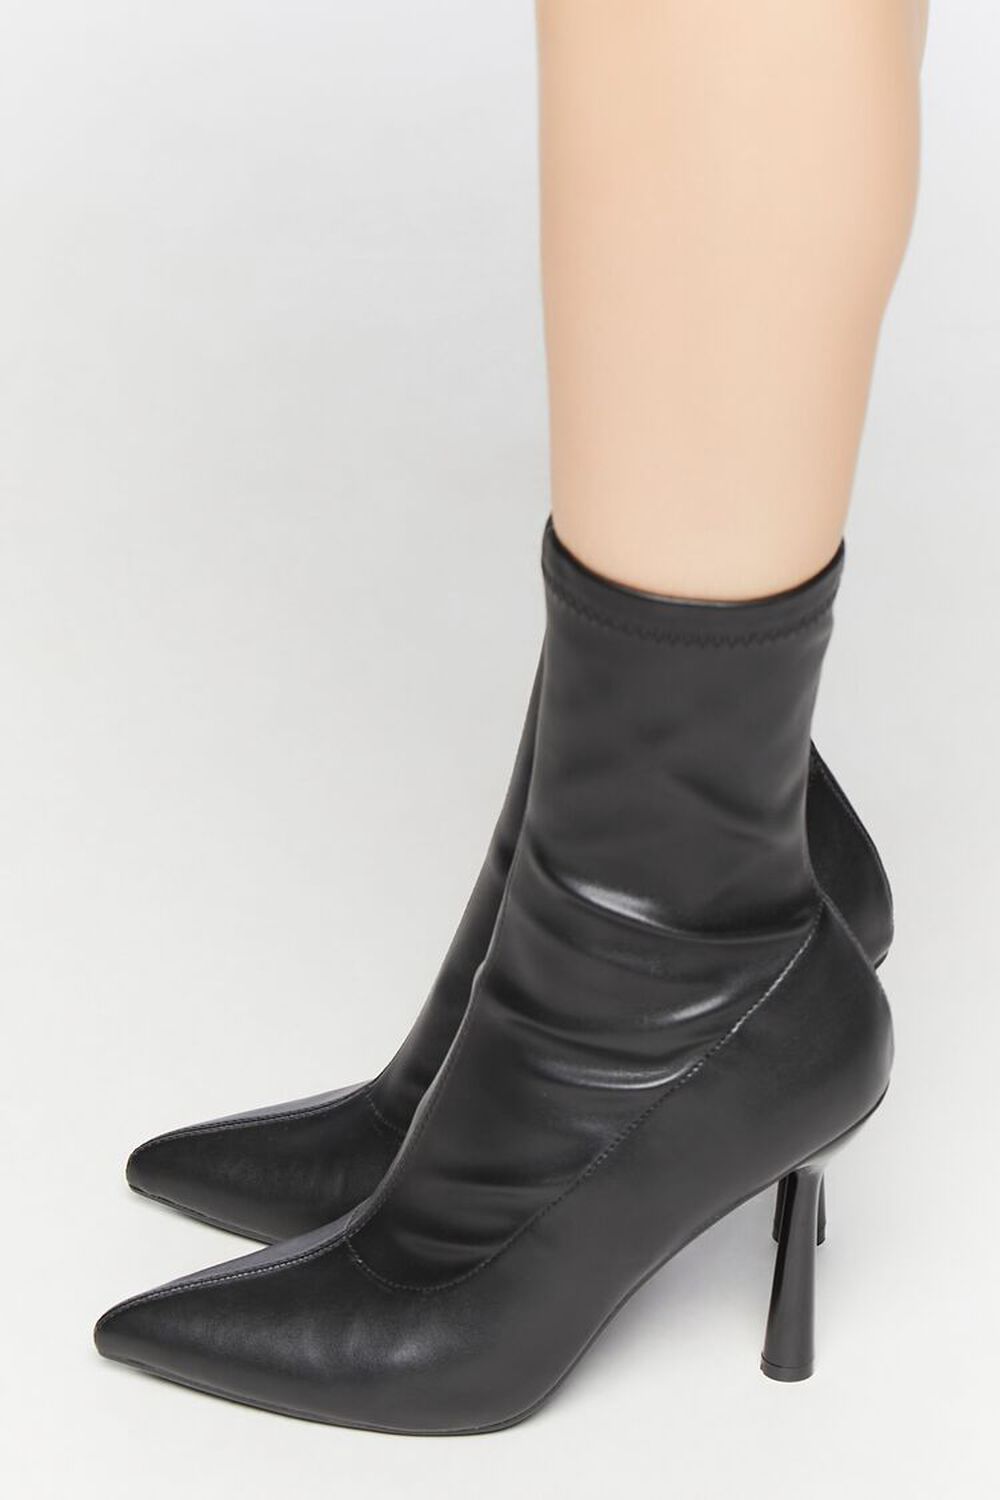 BLACK Faux Leather Stiletto Booties, image 2